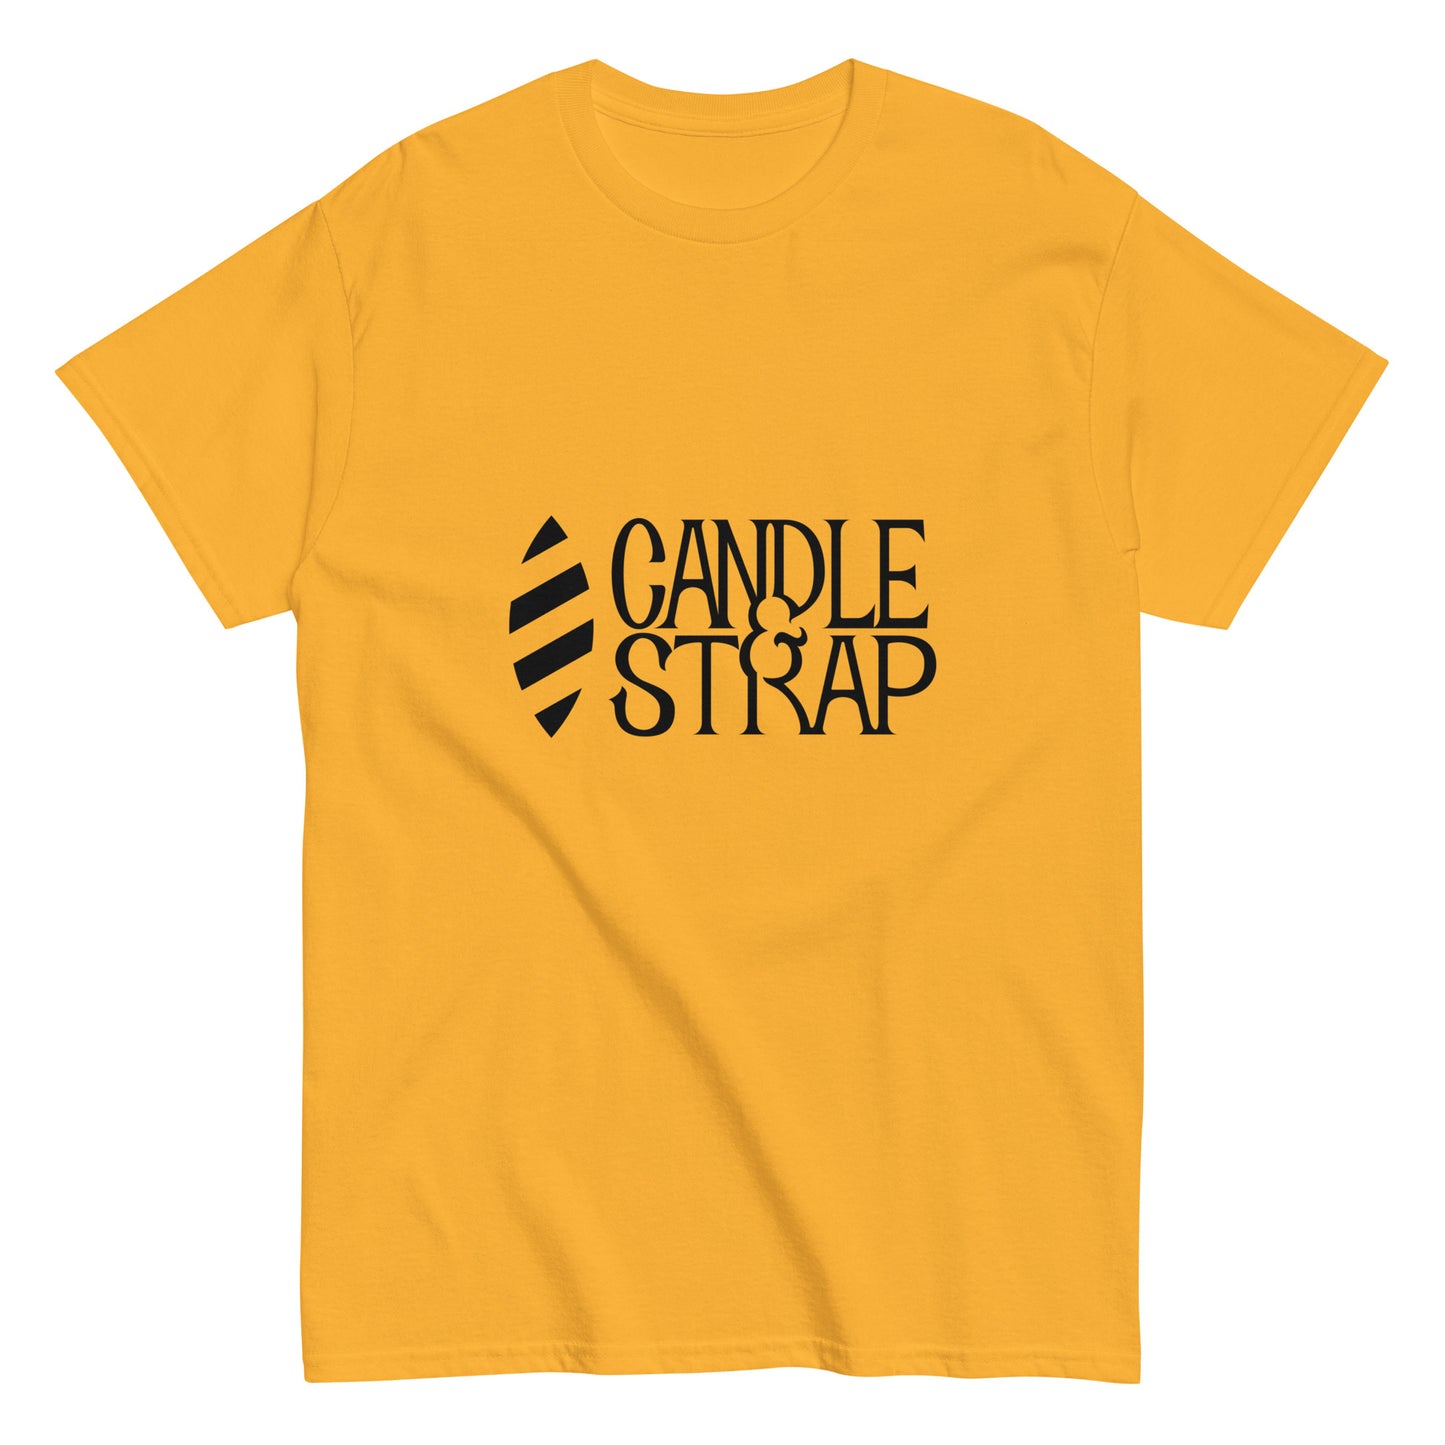 Candle & Strap - Men's classic tee